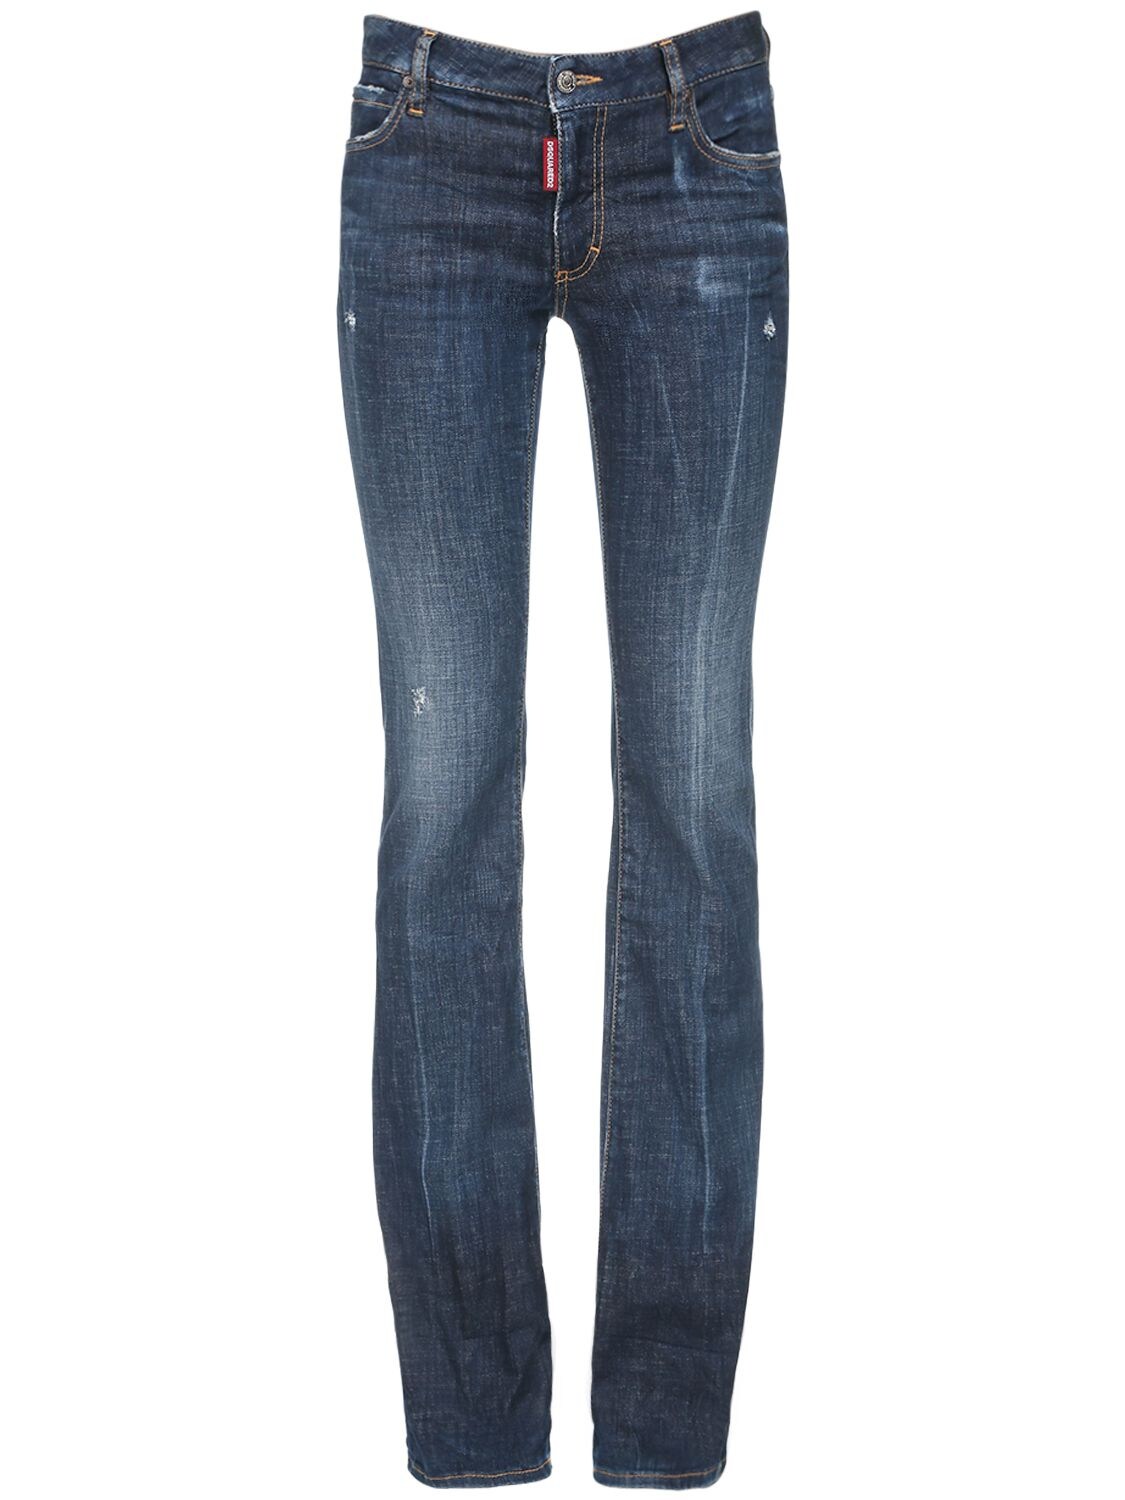 DSQUARED2 FLARED STRETCH COTTON DENIM JEANS,72I07Y086-NDCW0